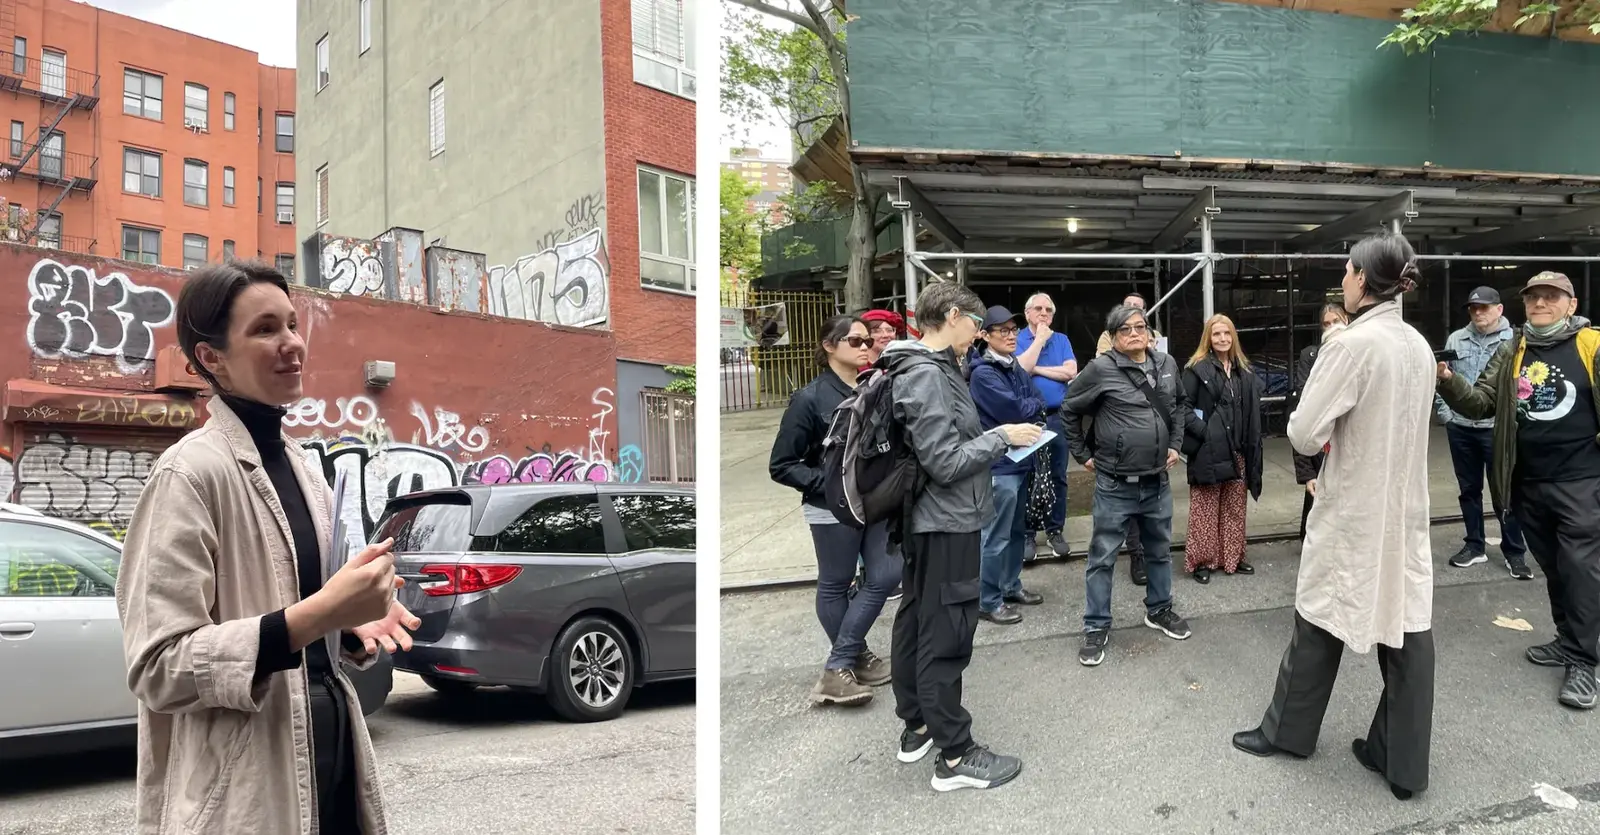 Our 2023 Jane's Walk was terrific! Here, Vera A Voropaeva of Castrucci Architects, speaks on the benefits of Passive House buildings outside her office. A video of this walk will be shared soon.